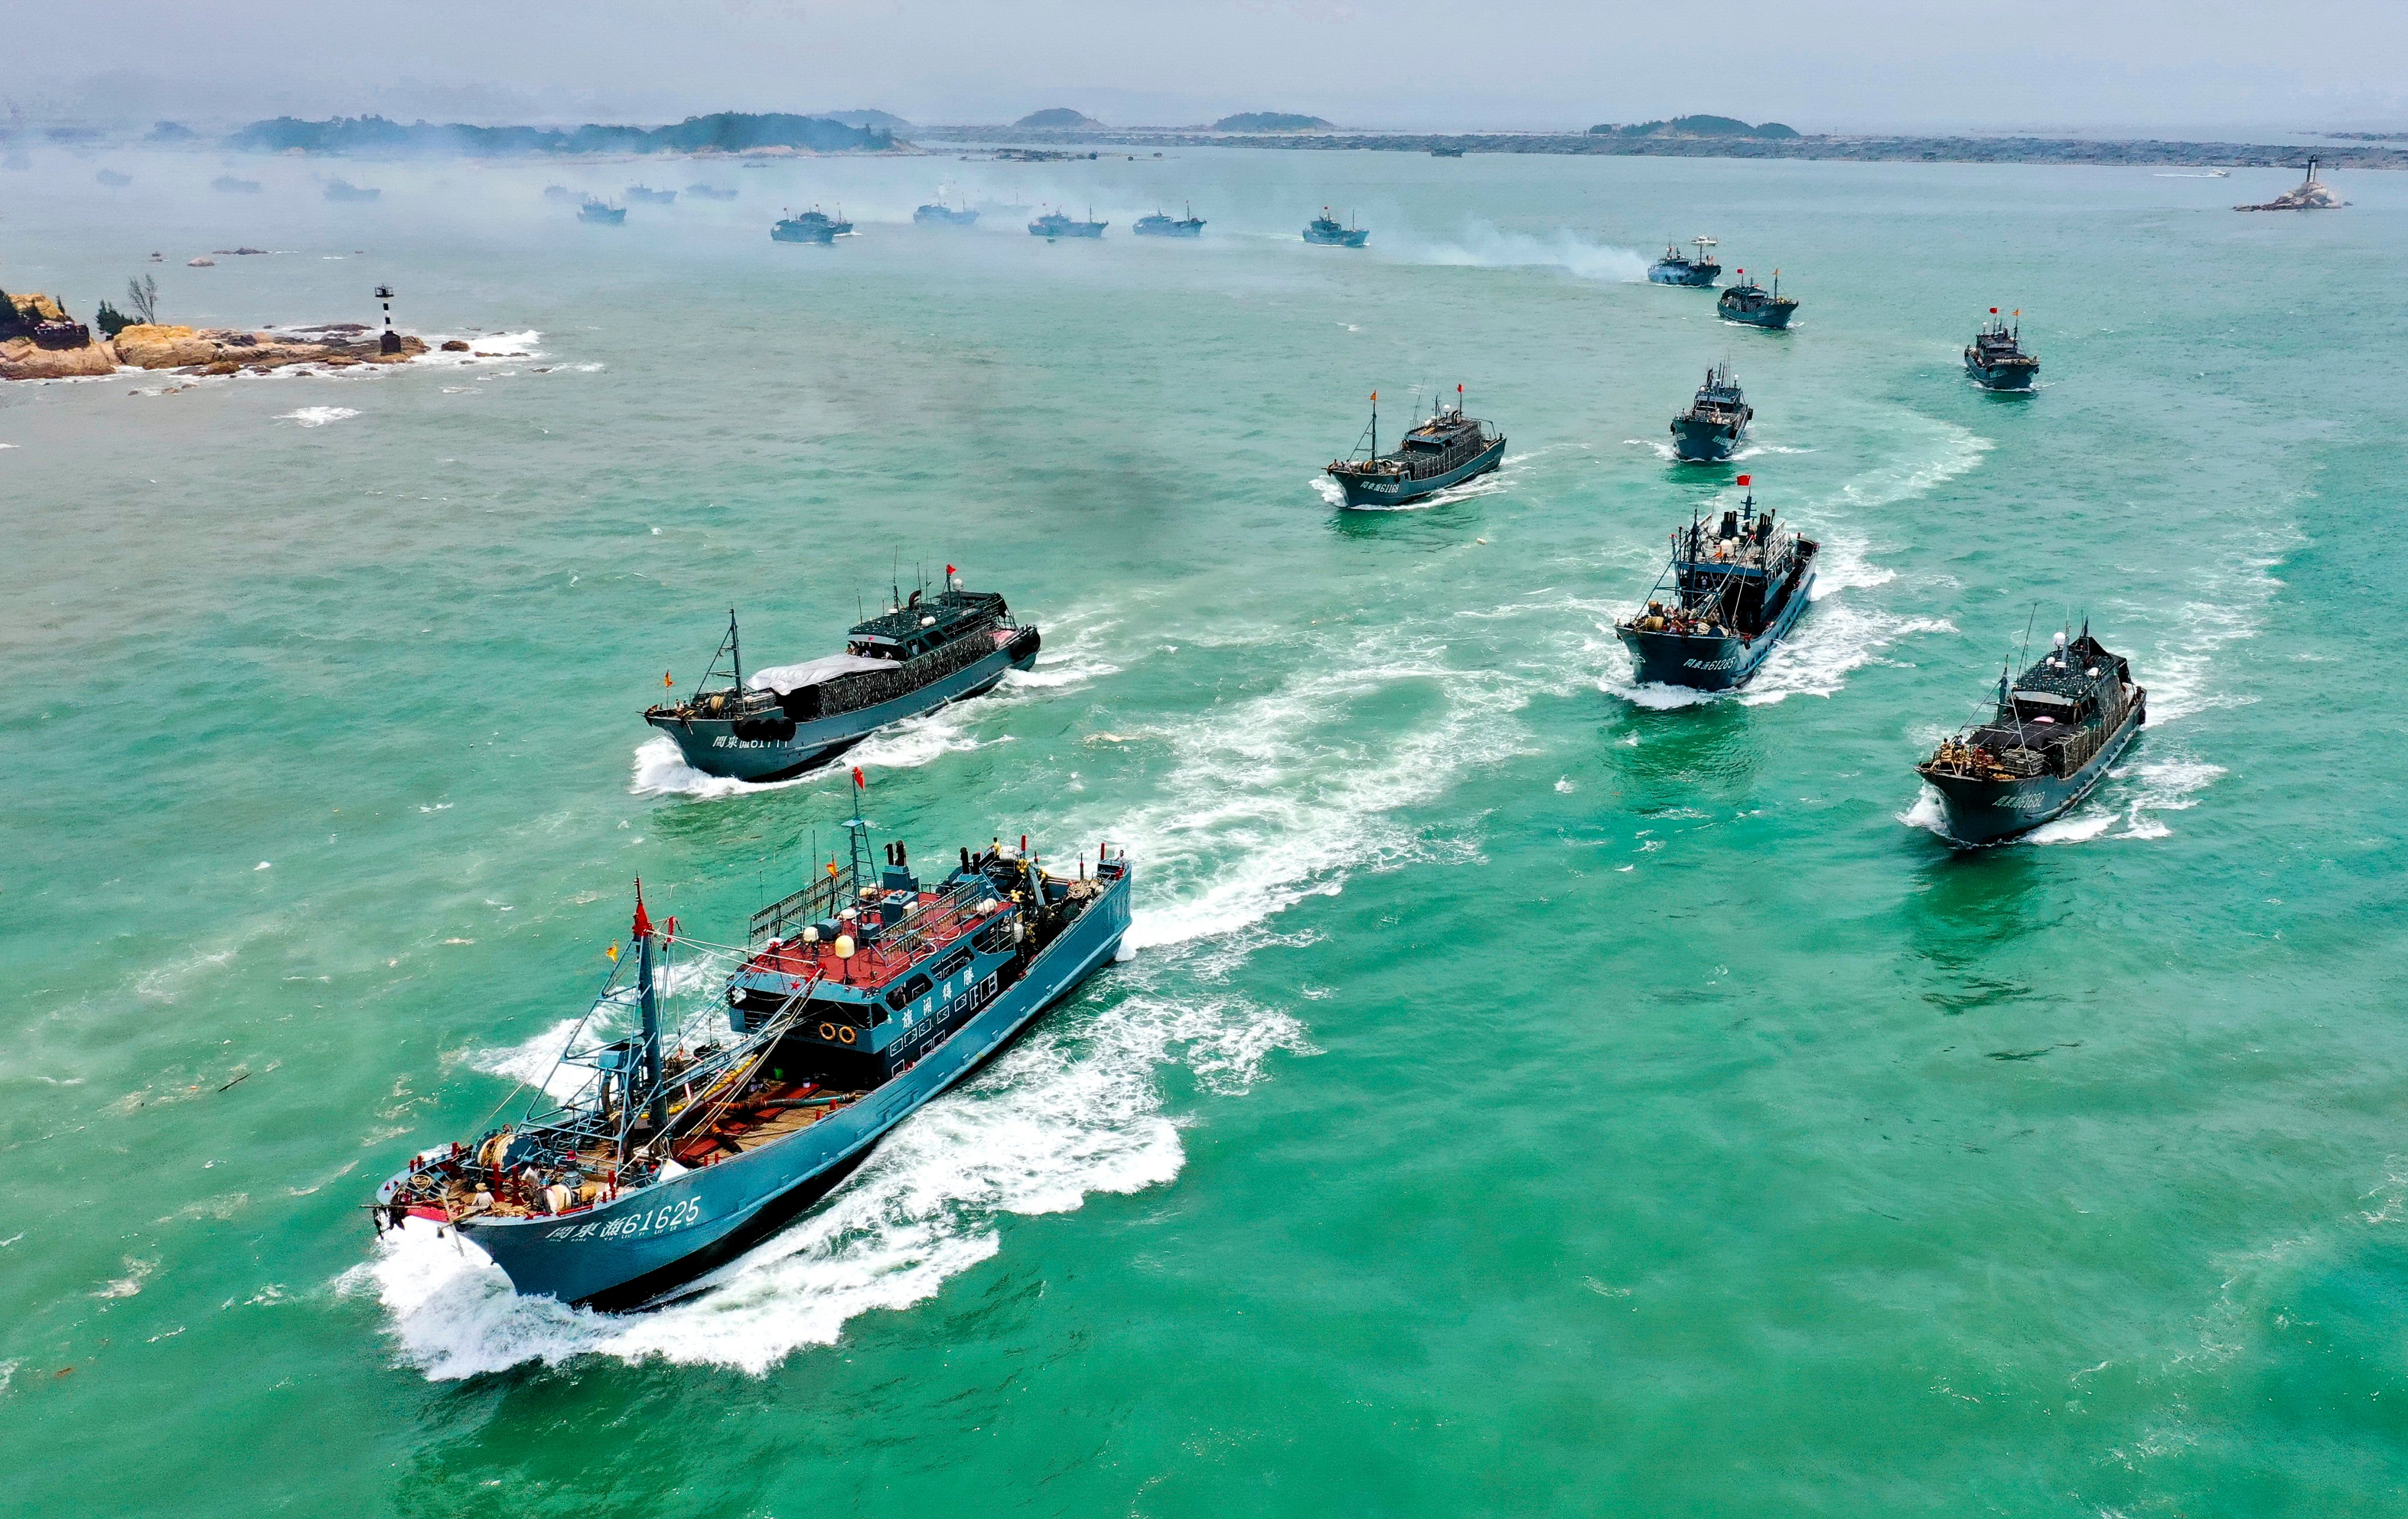 Fishing boats sail out of a fishing port in Dongshan county in southeast China’s Fujian province on August 1, 2020. Fisheries subsidies contribute significantly to overfishing, threatening the sustainability of fisheries worldwide. Photo: Xinhua